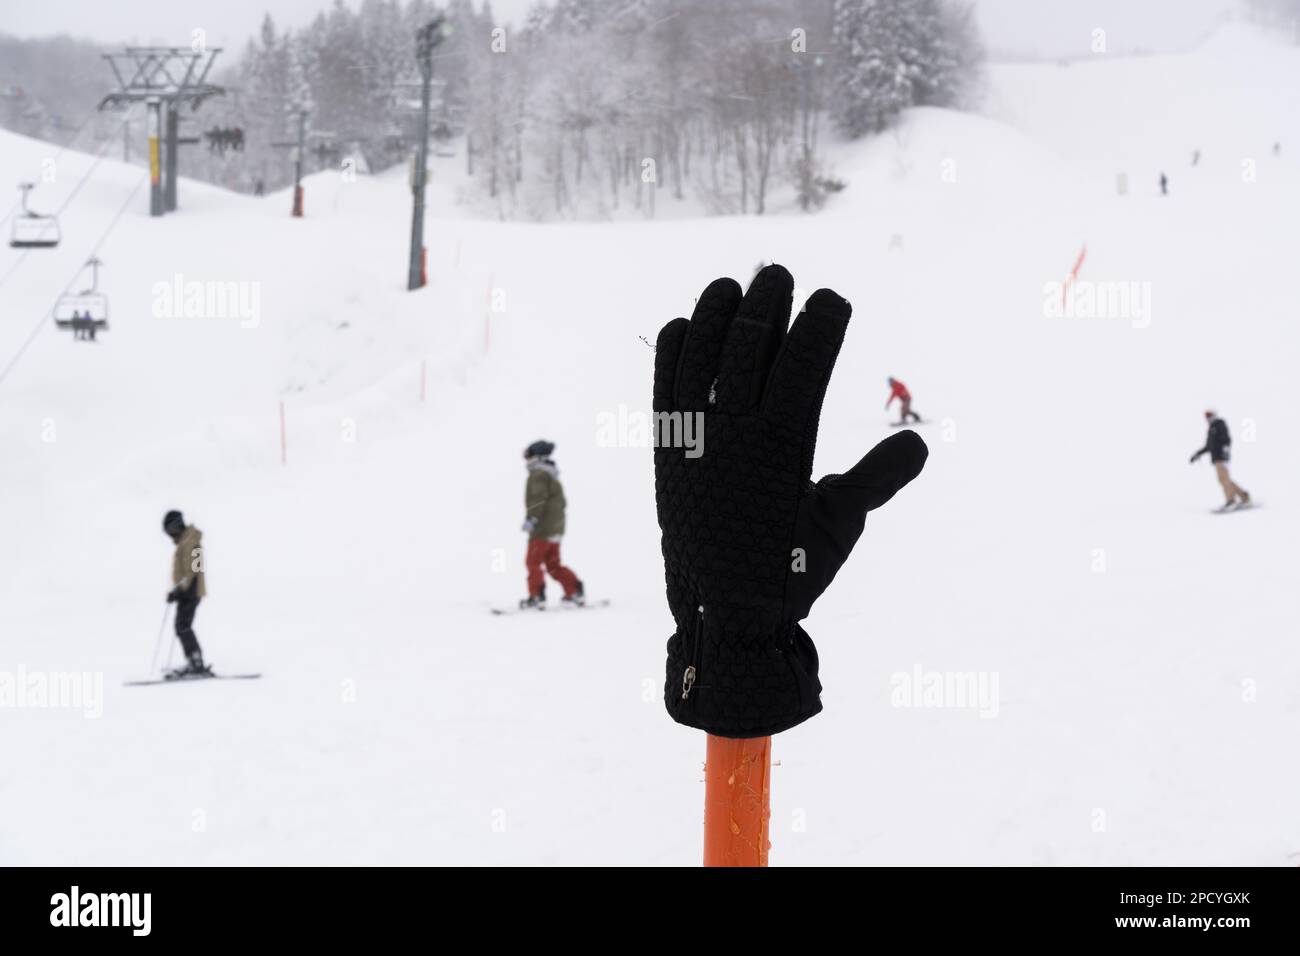 Snow glove was placed on a fence in ski resort in Japan Stock Photo